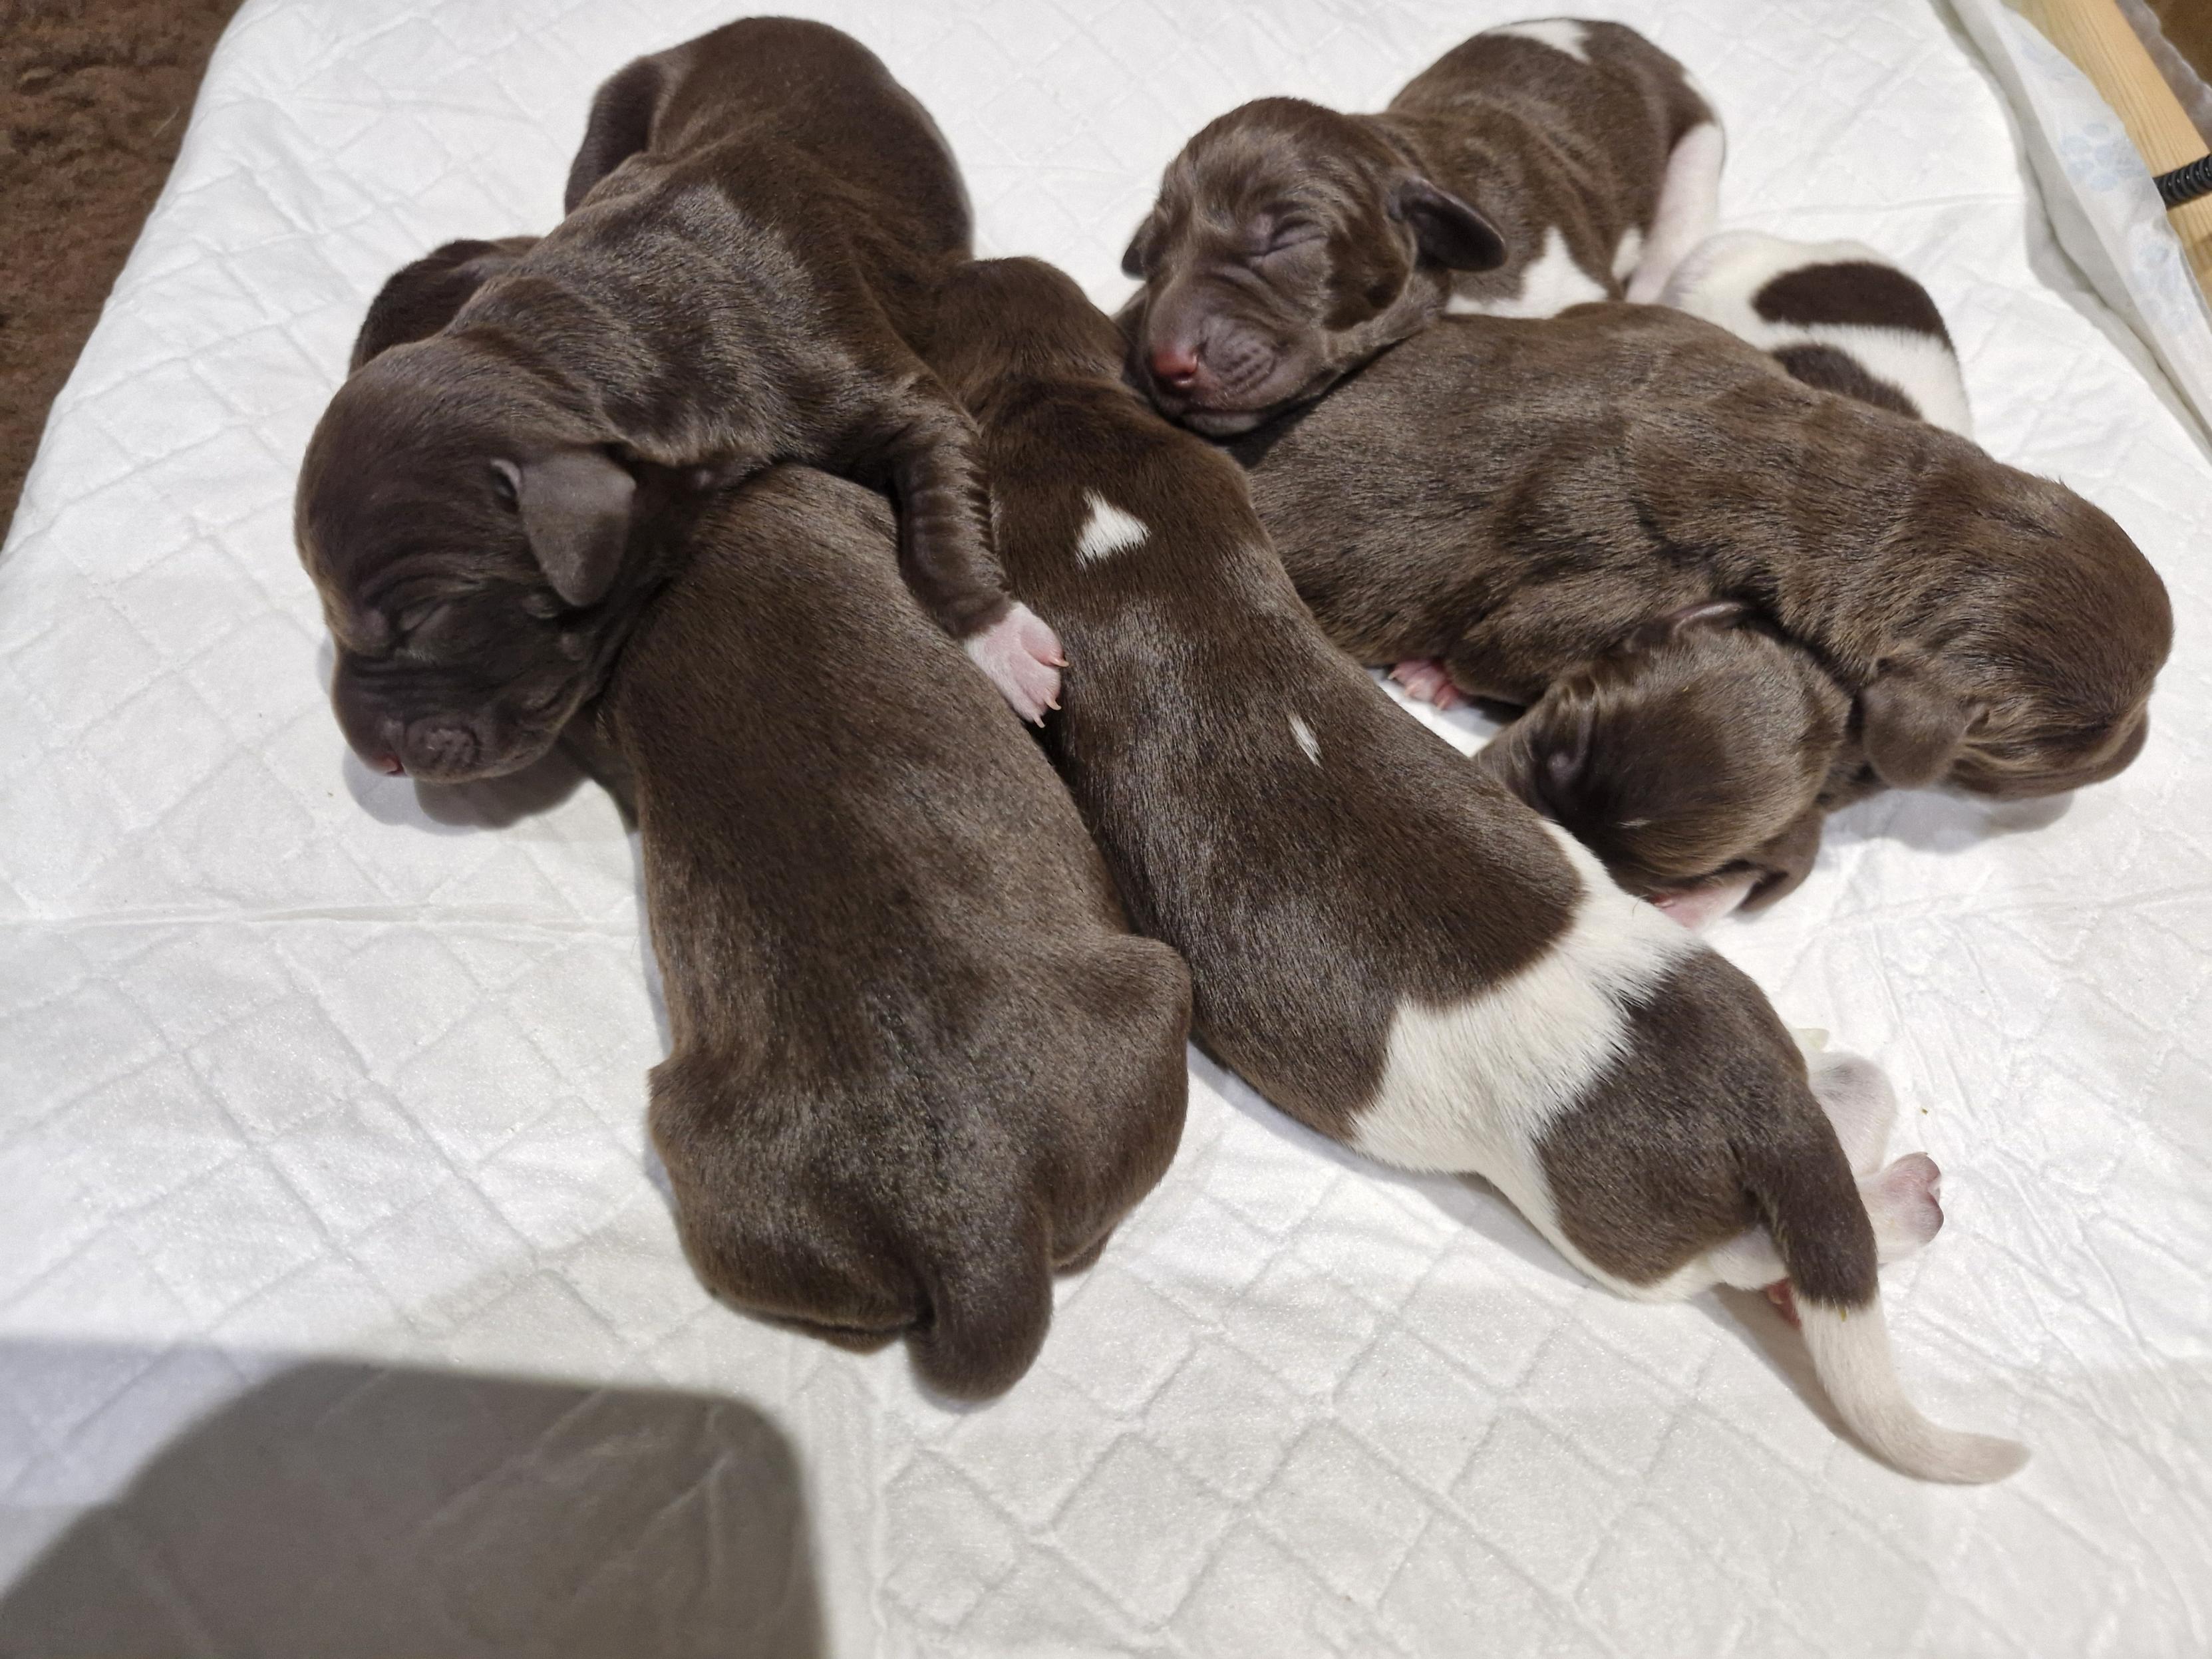 Puppies at 4 days old